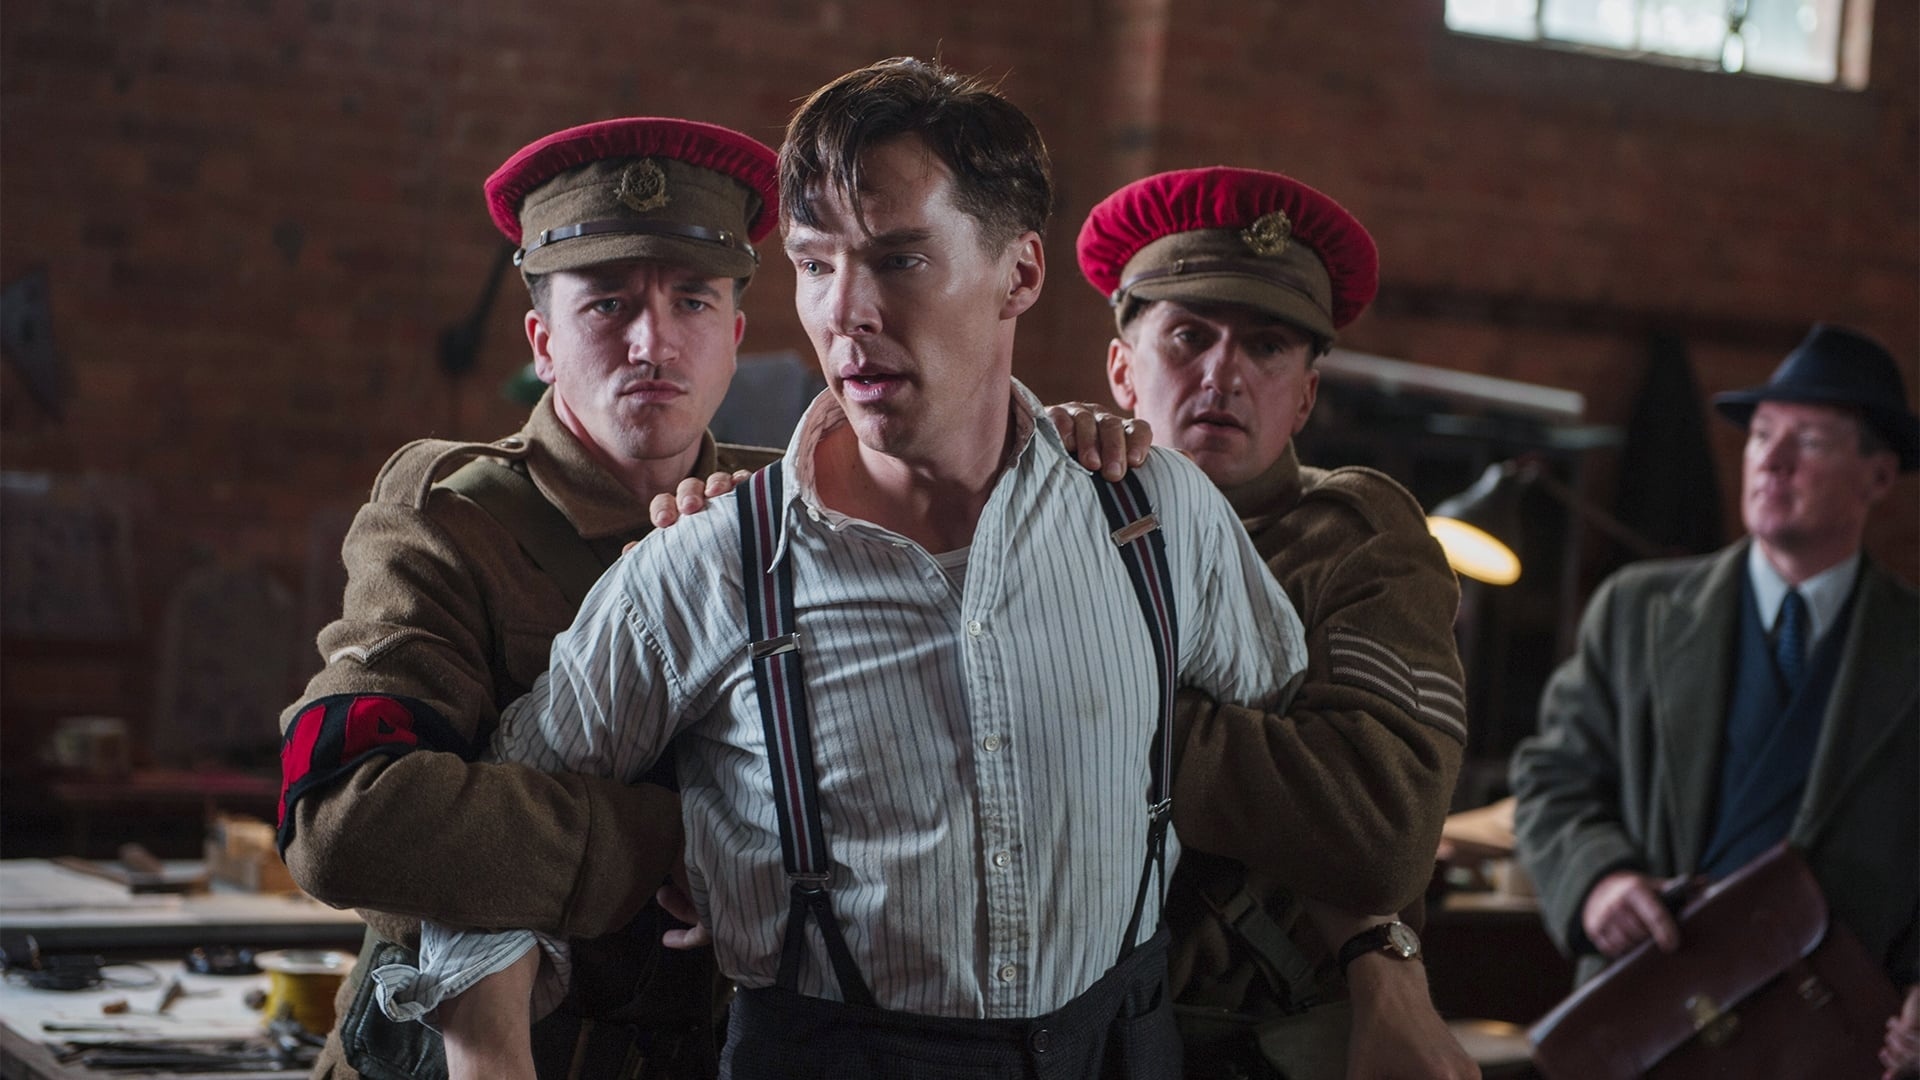 The Imitation Game: A mathematical genius and hero of World War II. 1920x1080 Full HD Background.